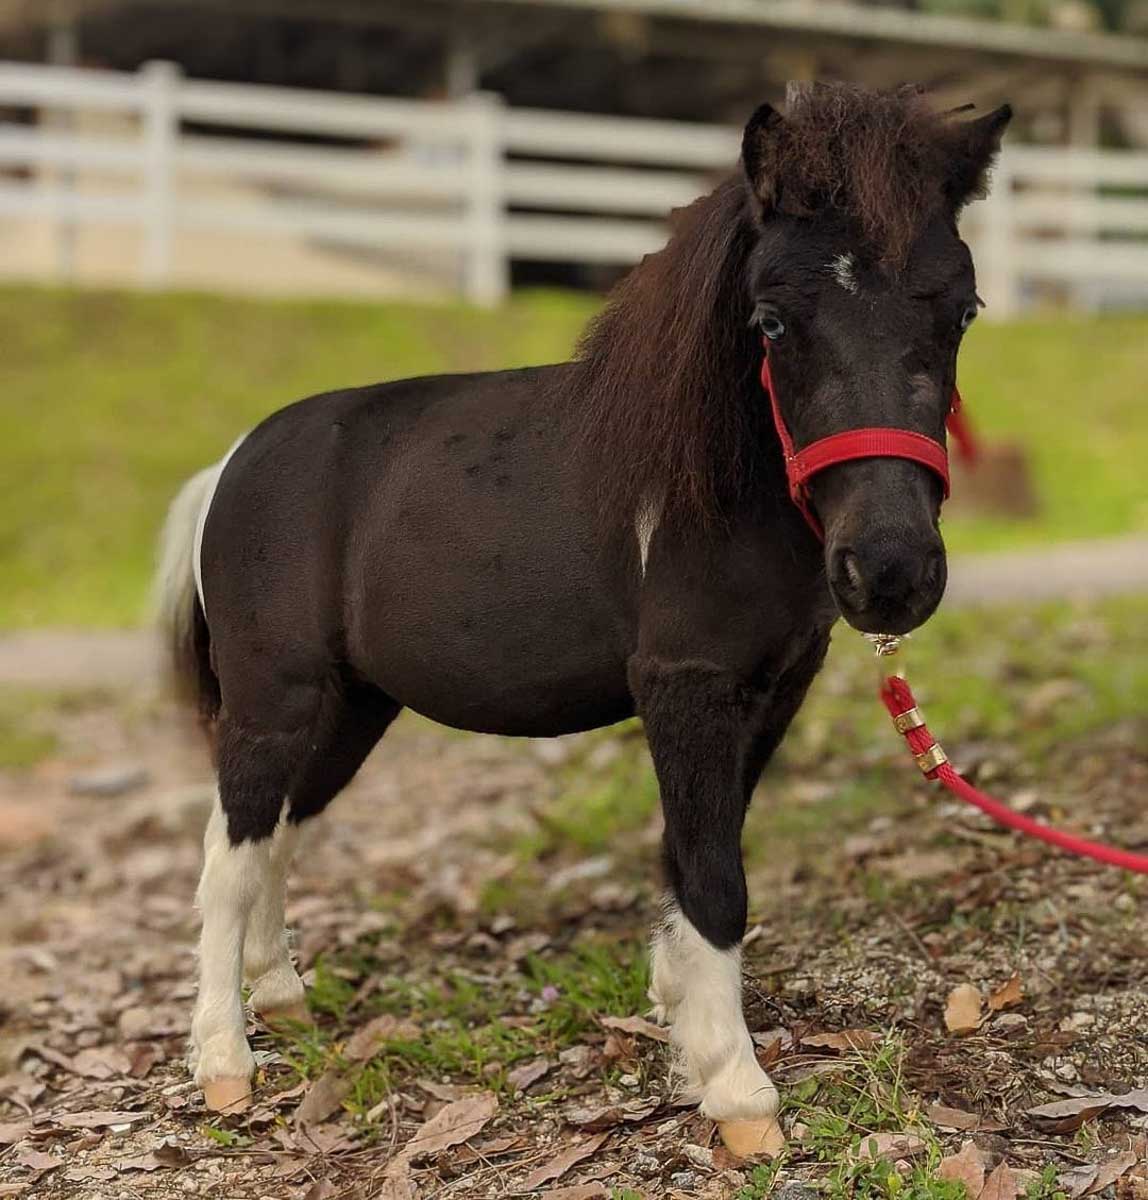 Equal Miniature Horse - Things to do in Singapore